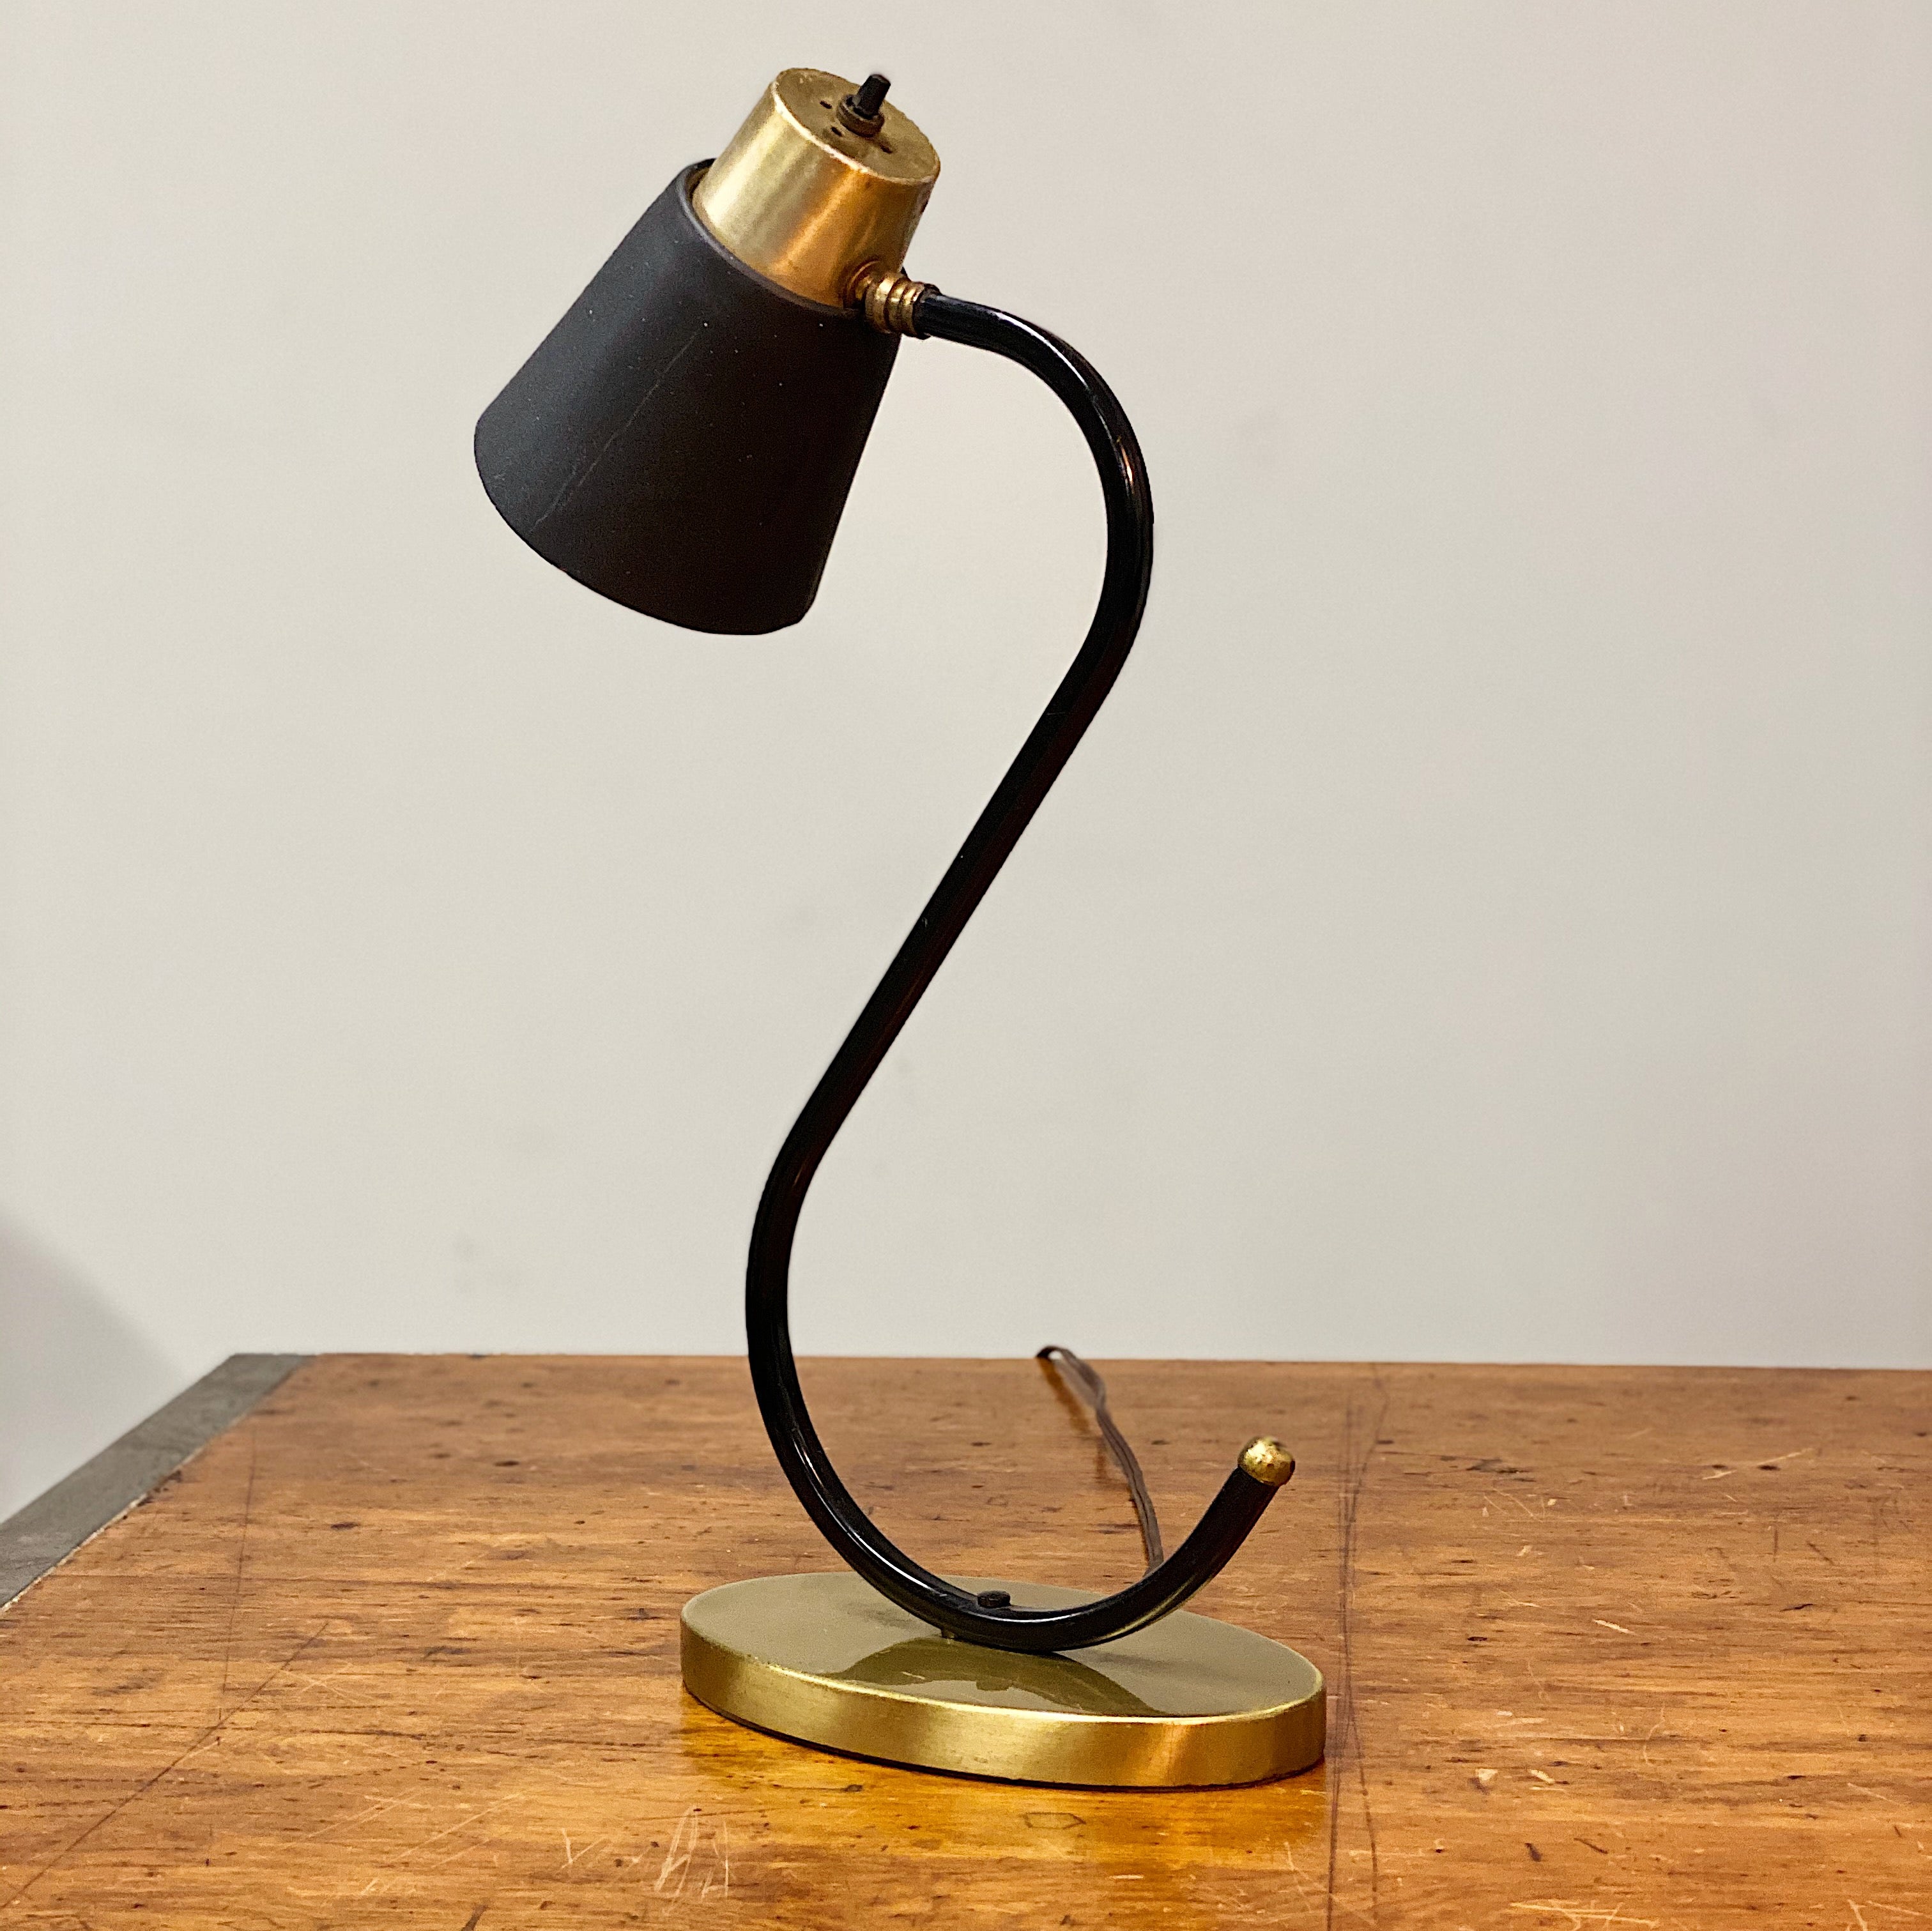 Reverse view Vintage Midcentury Desk Lamp with Unusual S Shape - Mod Black Table Lamp - Atomic Age Lighting - Rare 1950s Accent Light